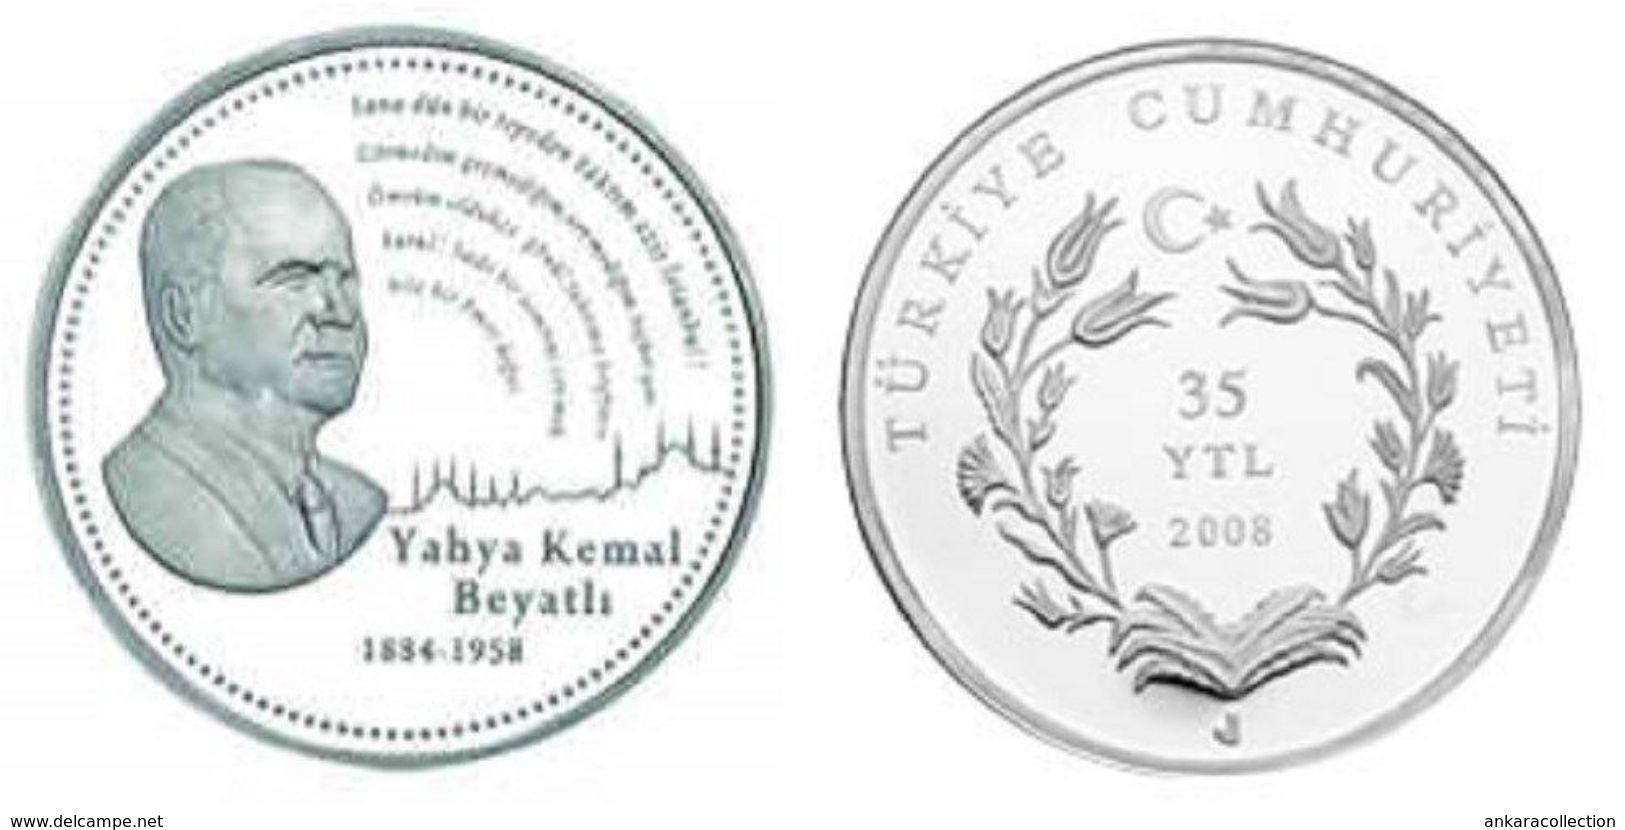 AC - YAHYA KEMAL BEYATLI TURKISH POET AND AUTHOR COMMEMORATIVE SILVER COIN TURKEY 2008 PROOF UNC - Unclassified